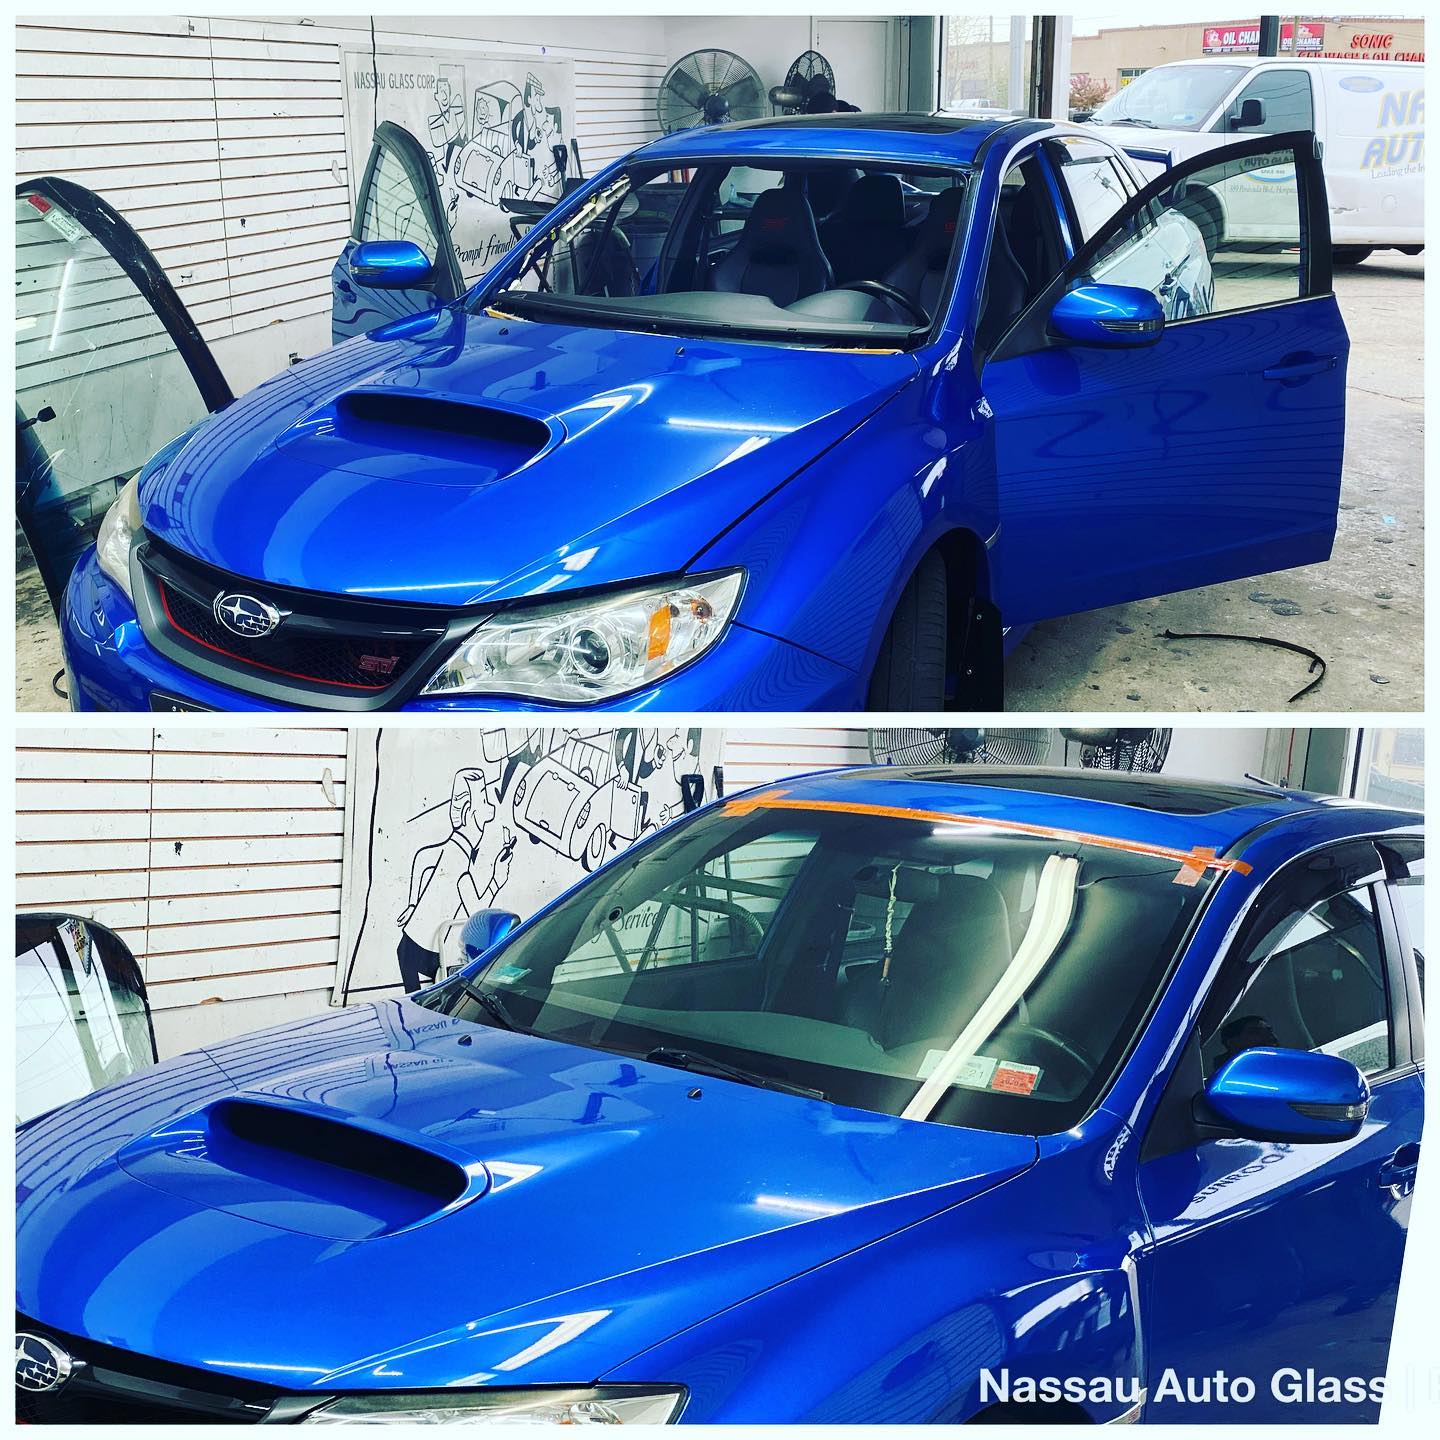 Nassau Auto Glass Services: Before & After Picture 11